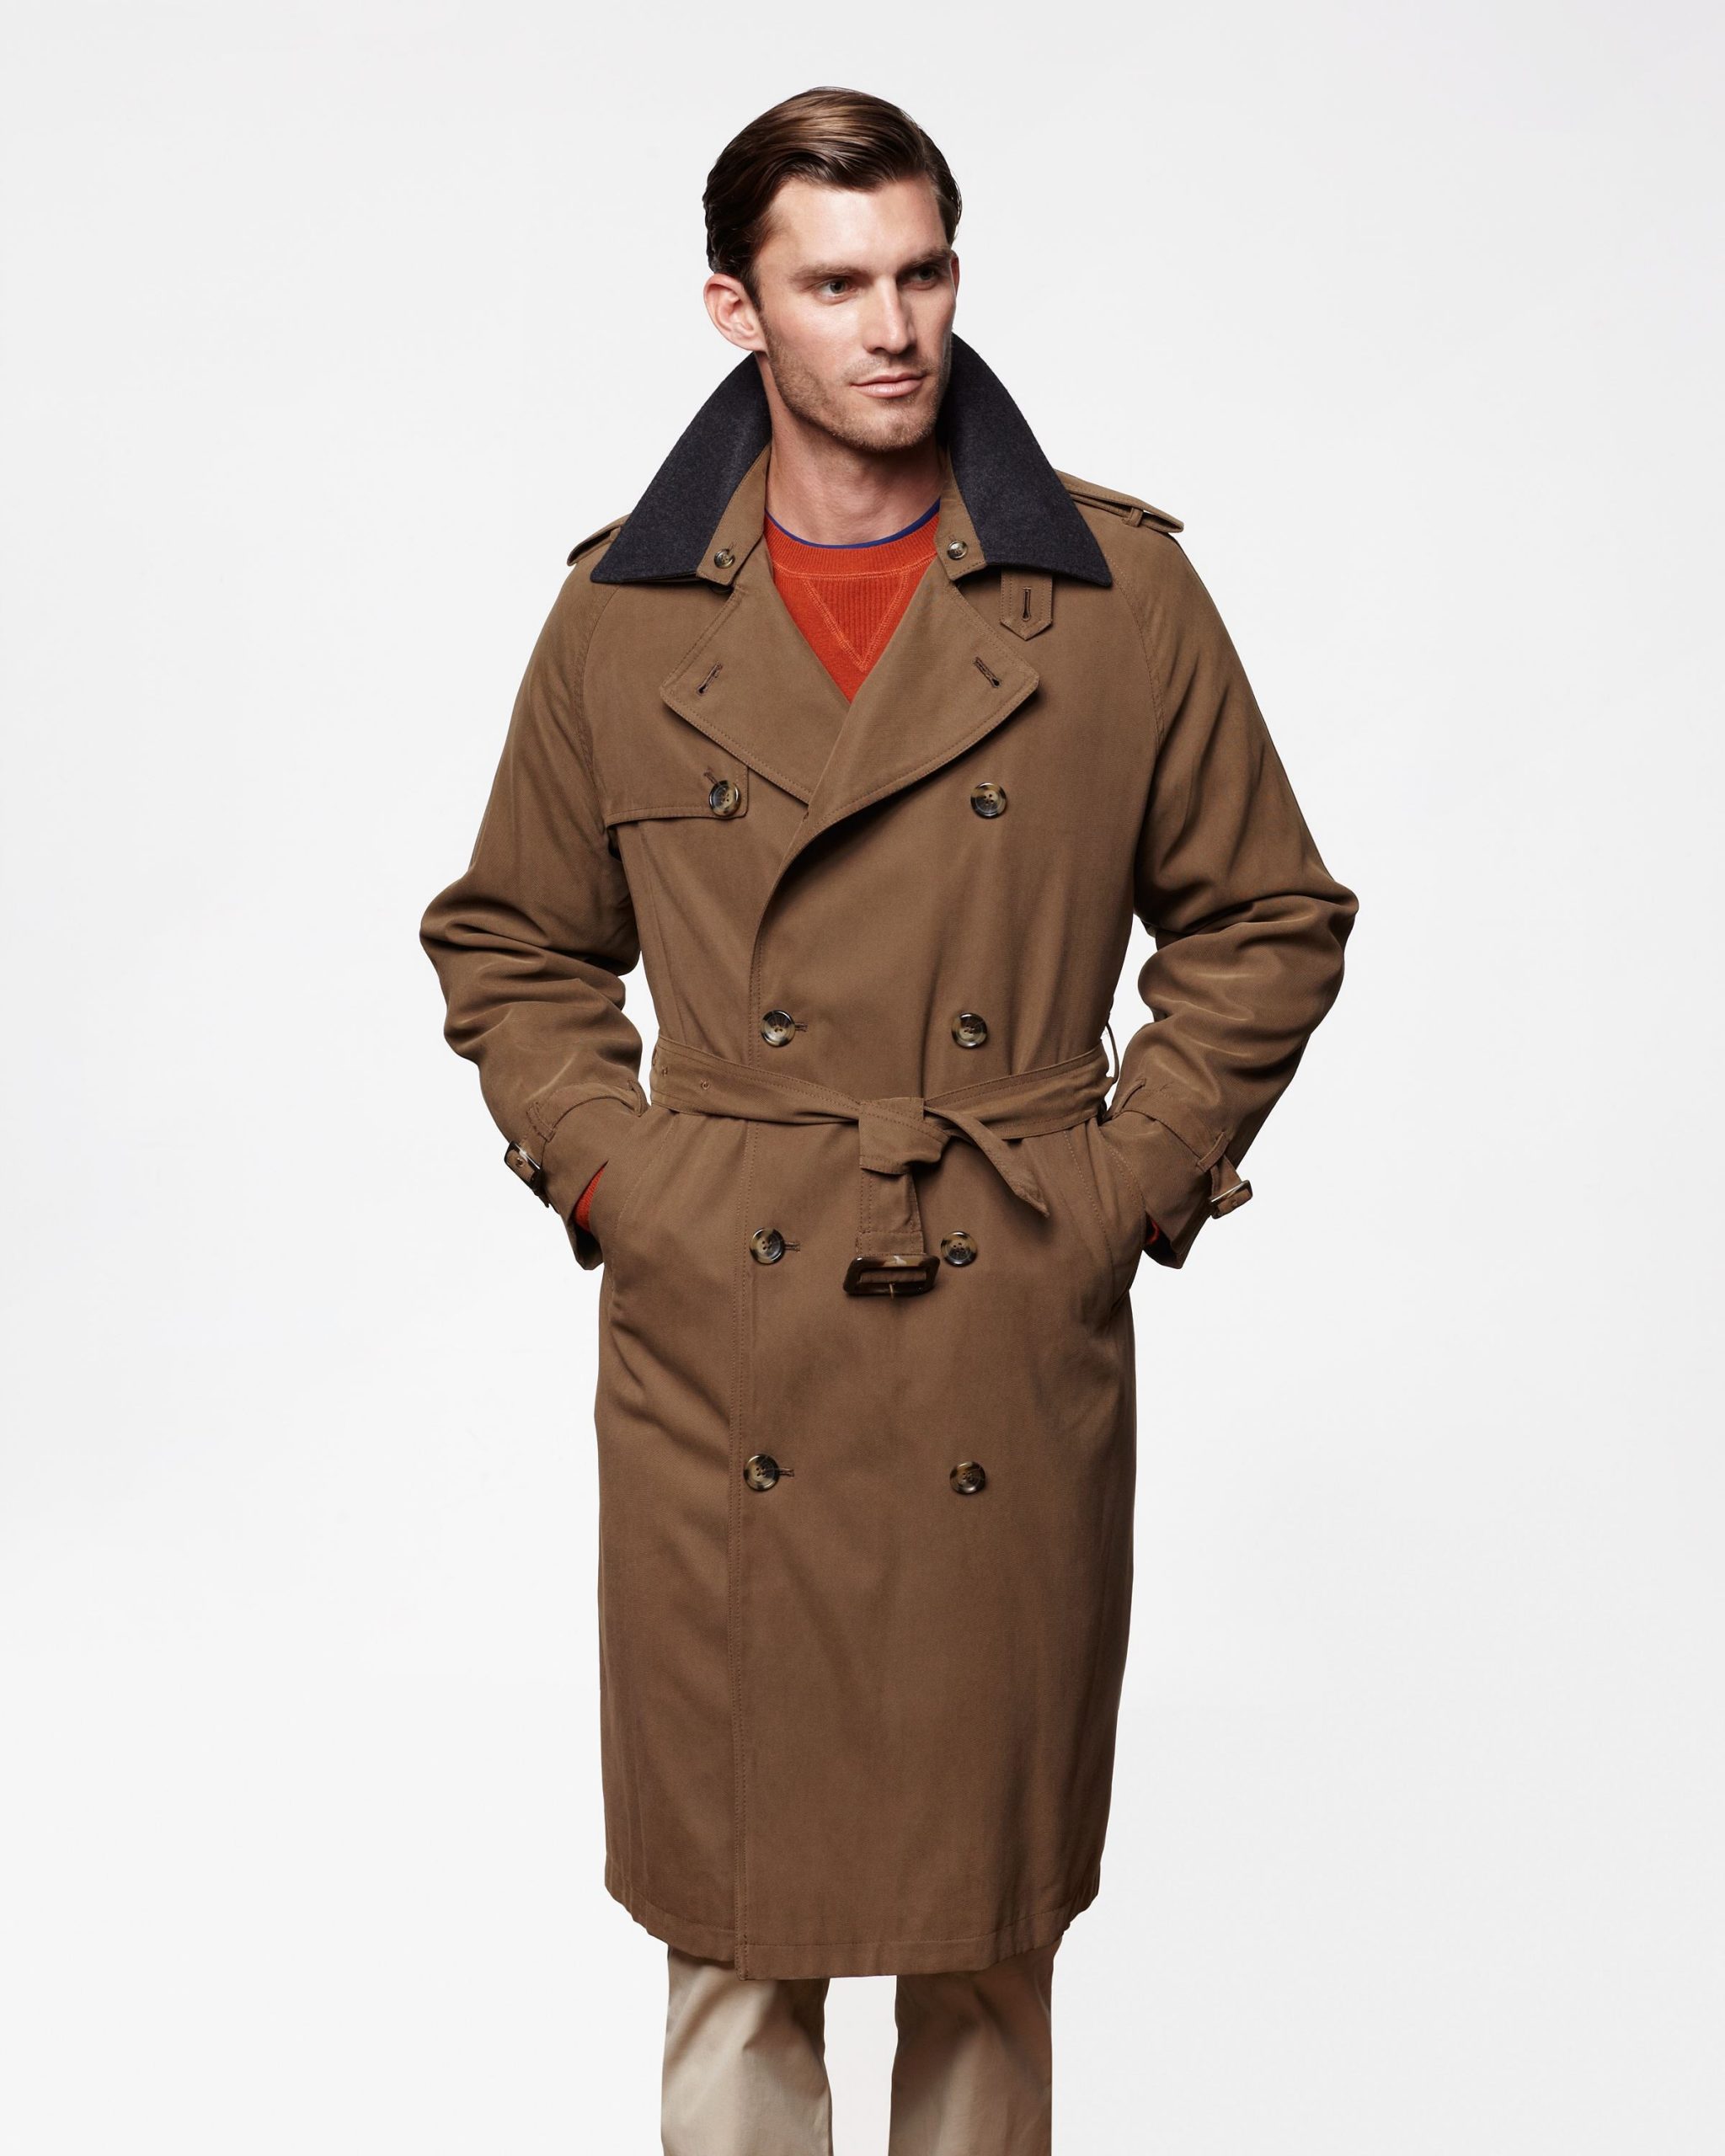 Trench Coat for Men Outfit Ideas